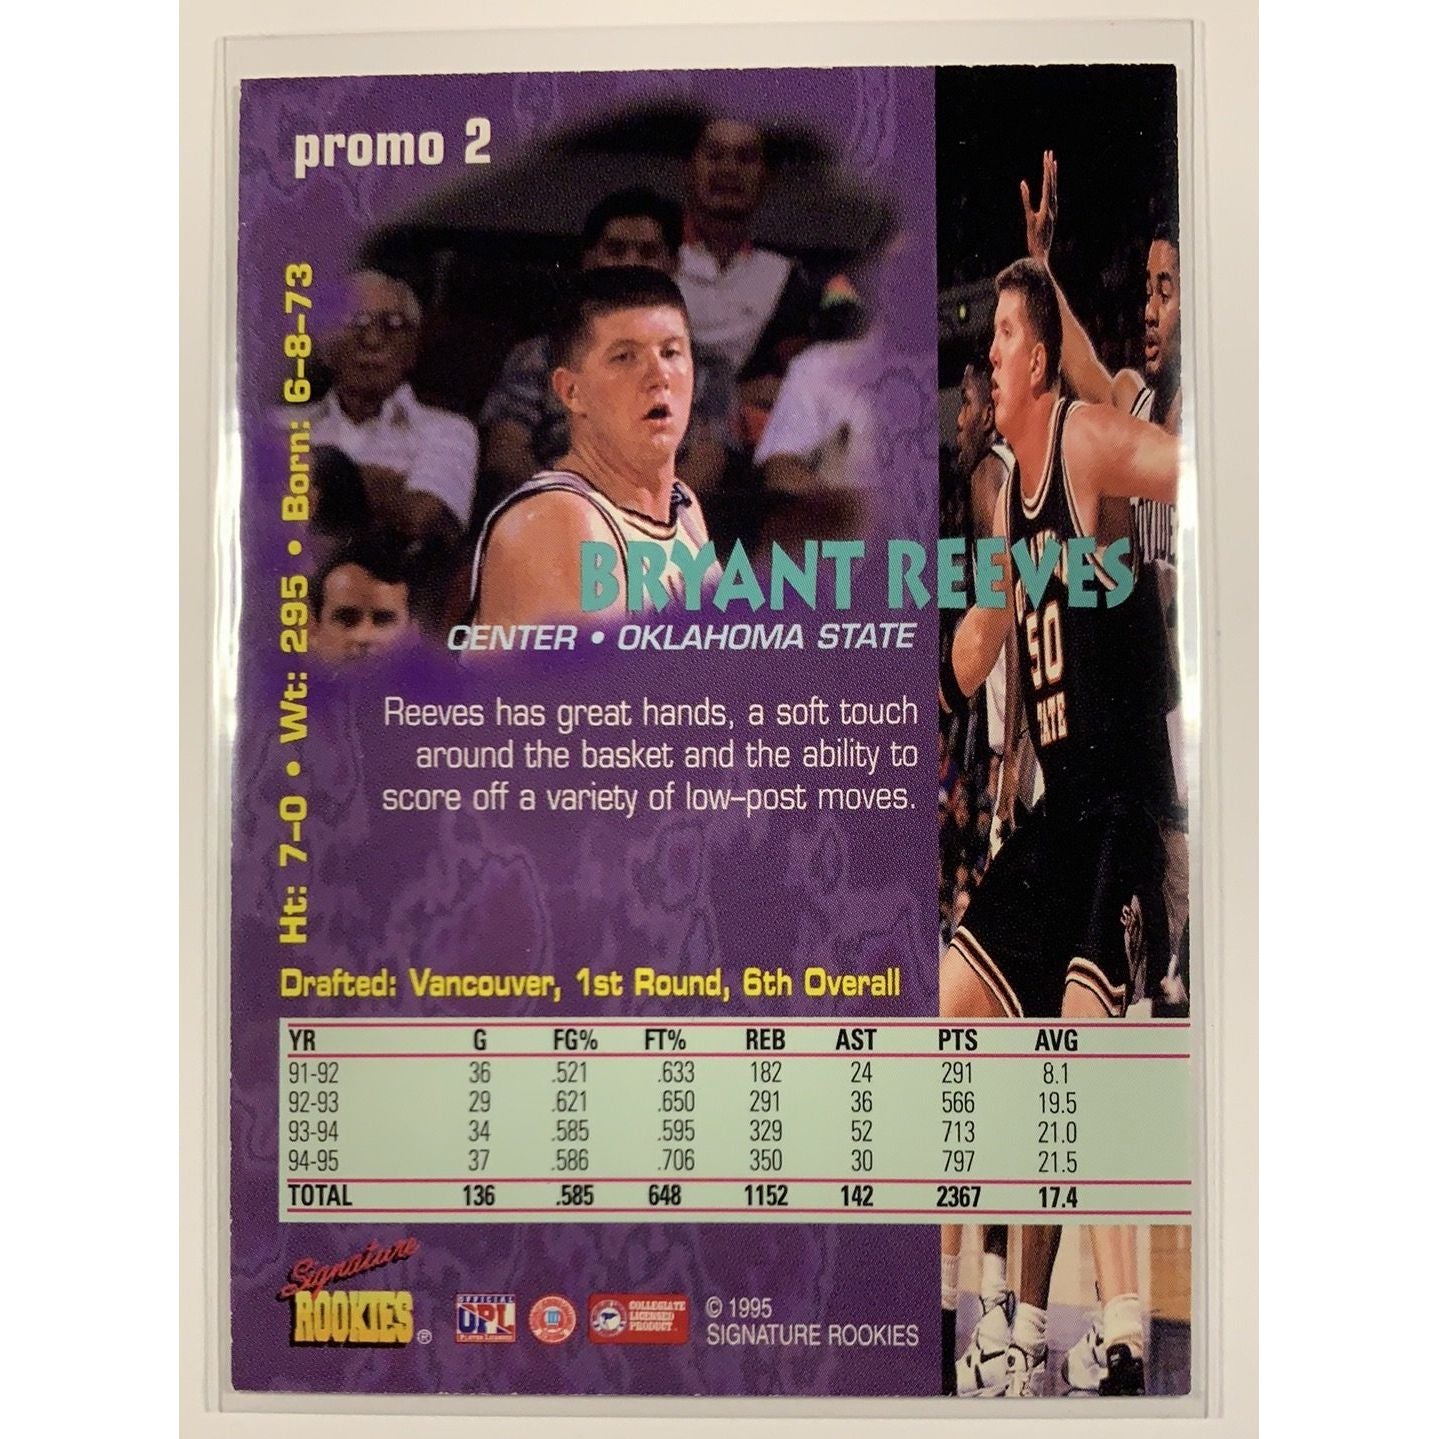  1995 Signature Rookies Bryant BIG COUNTRY Reeves Promo Card  Local Legends Cards & Collectibles